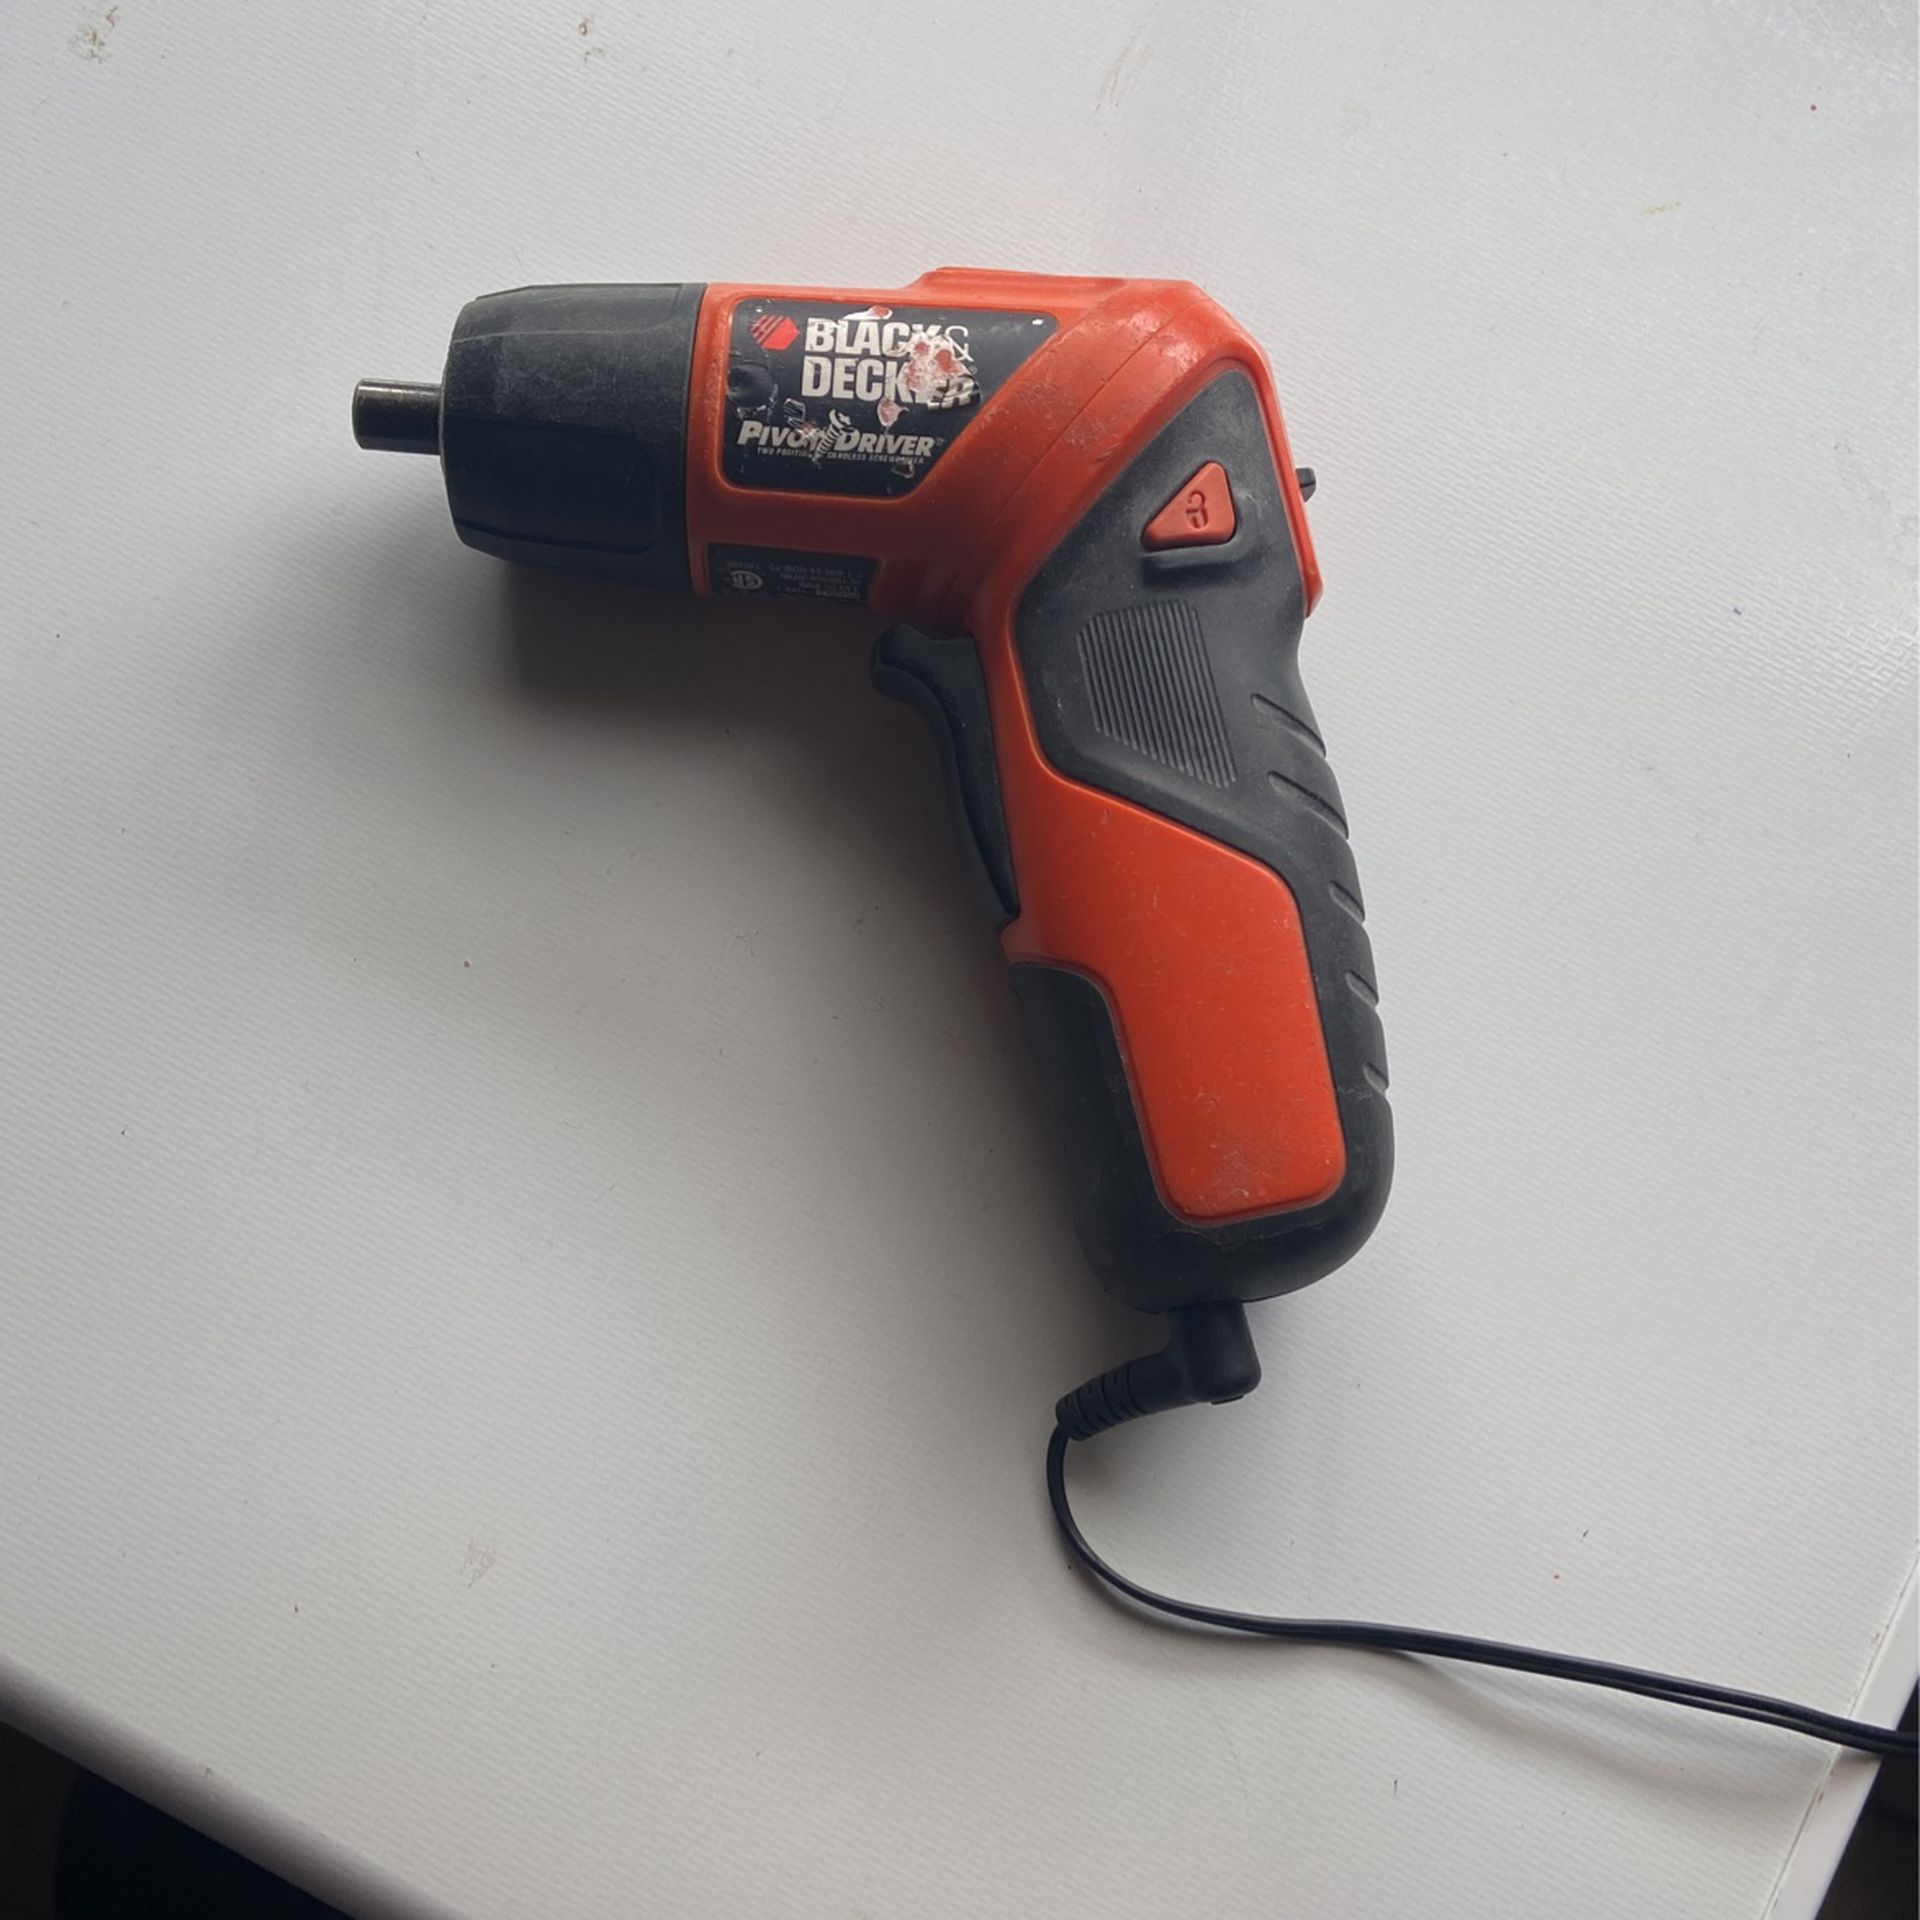 Black And Decker Pivot Driver for Sale in Henderson, NV - OfferUp